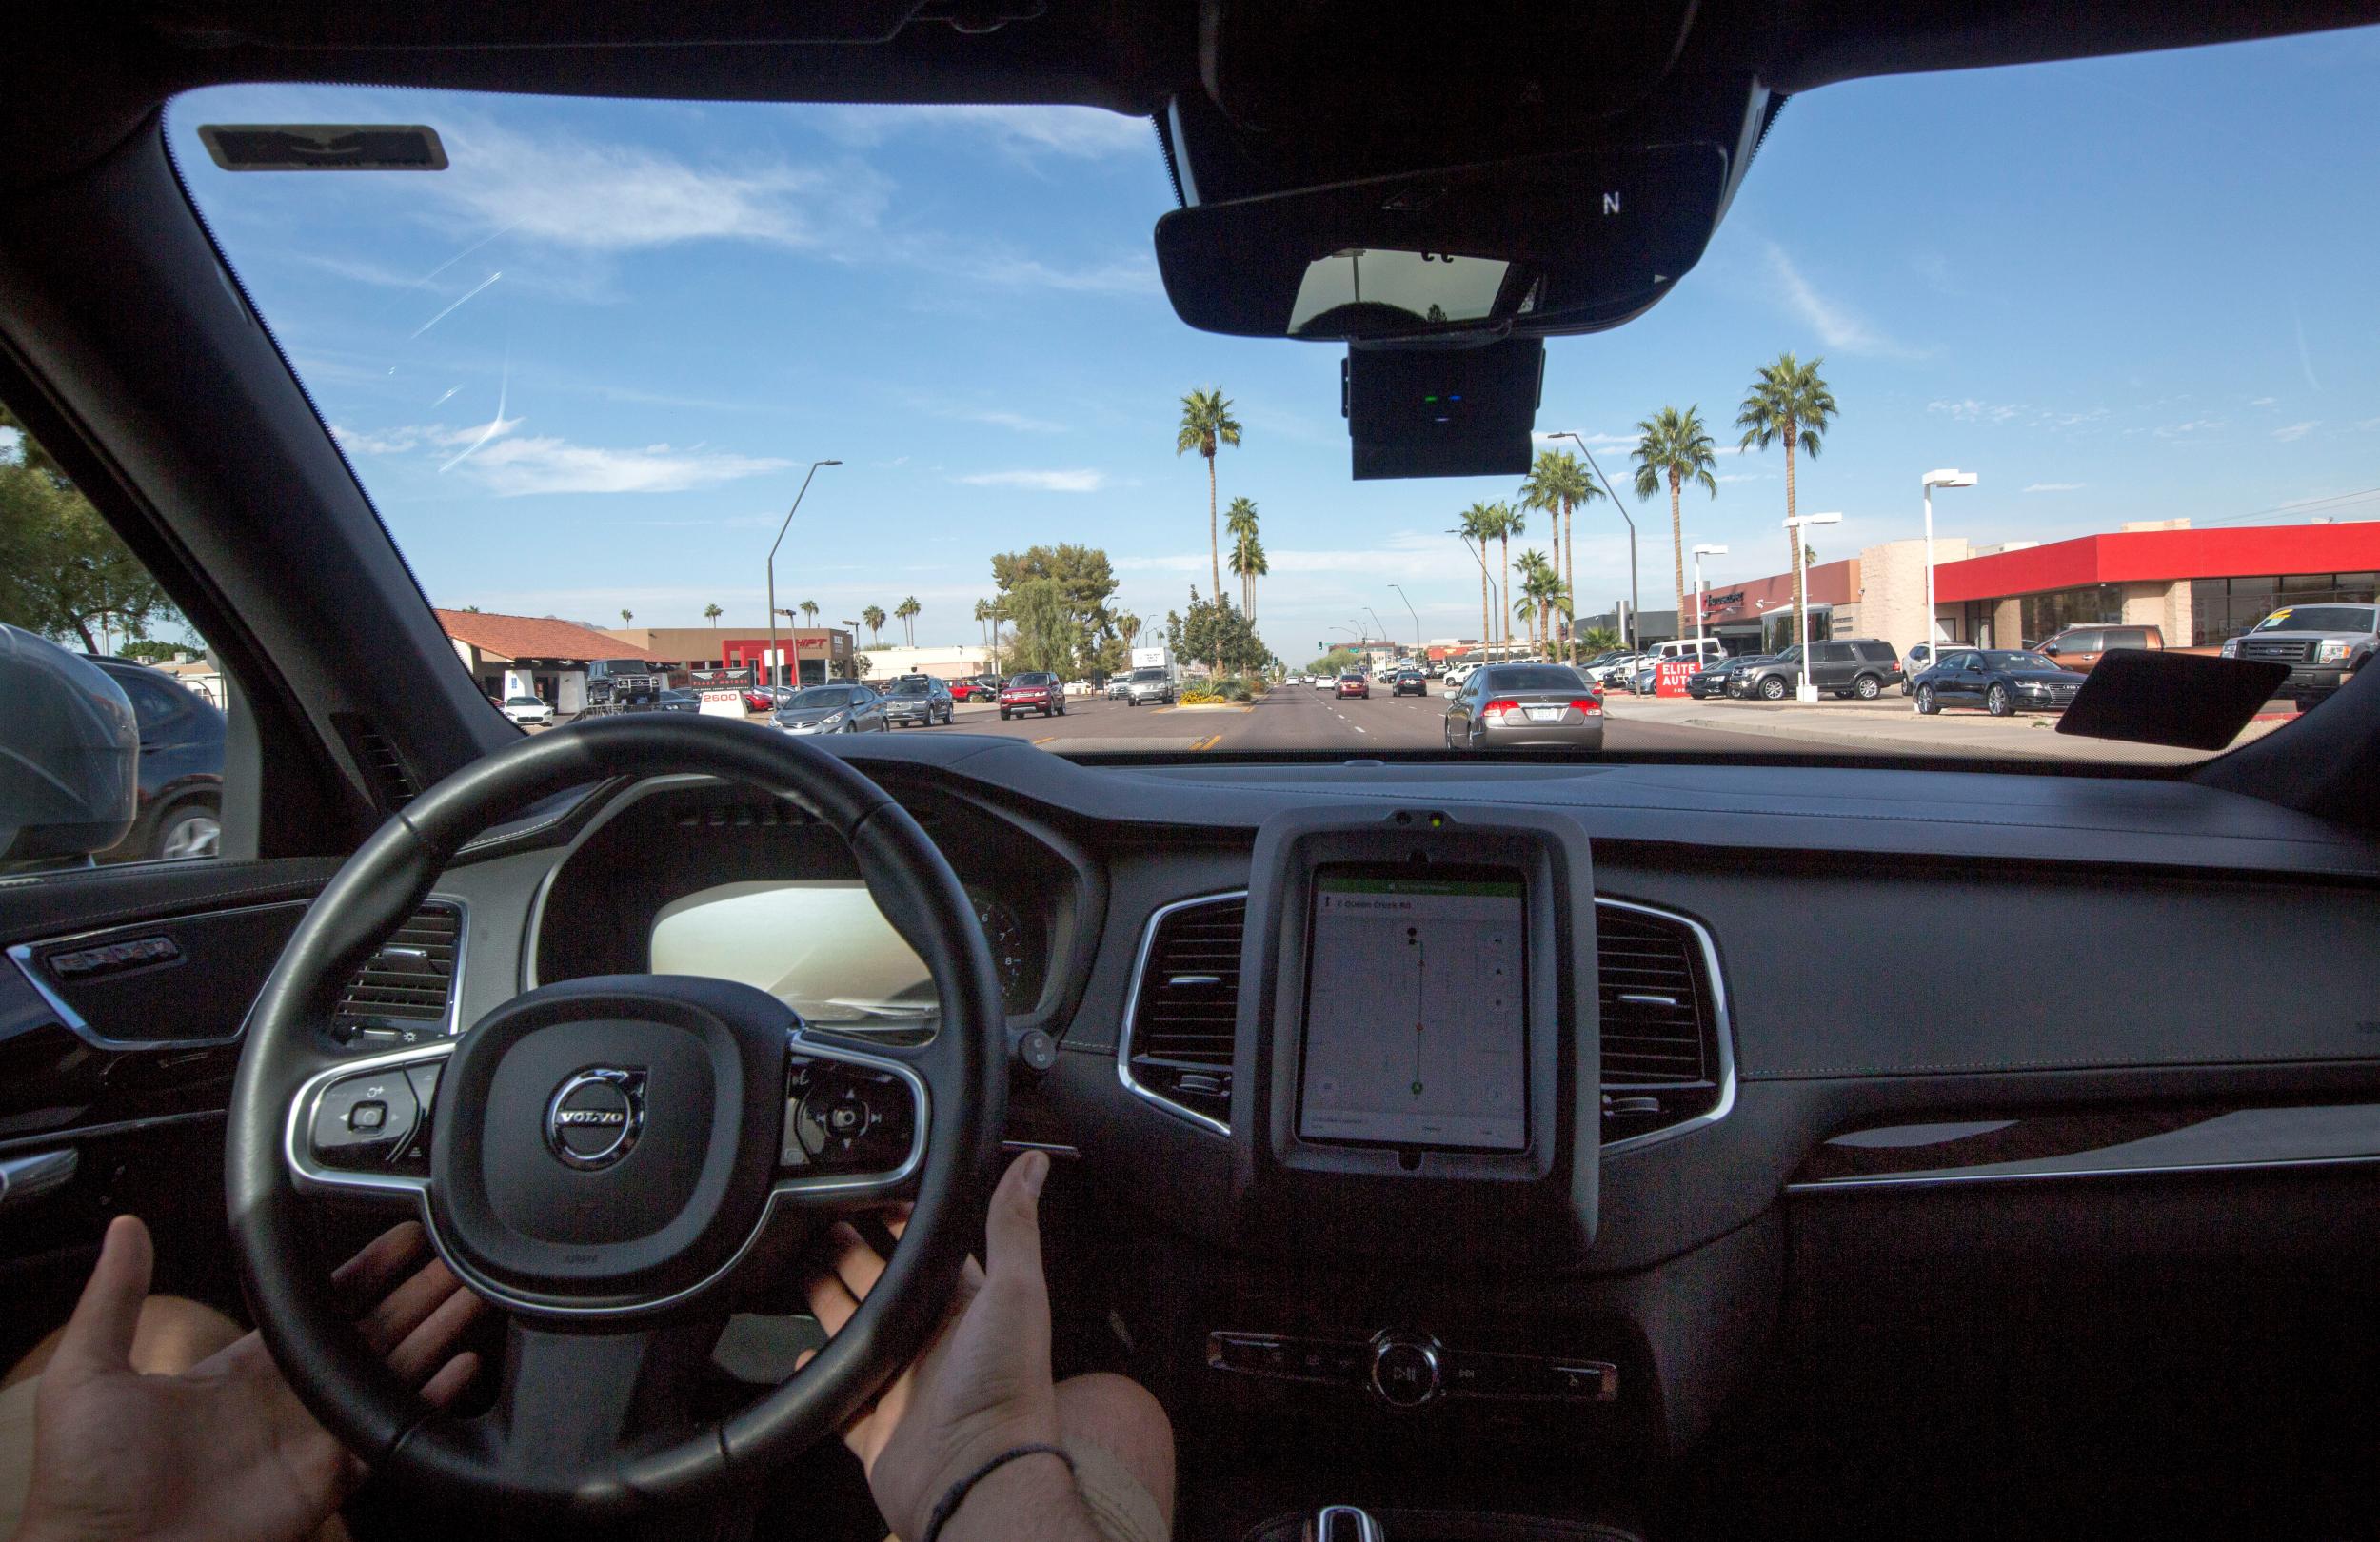 Uber's self driving cars in Arizona were welcomed with open arms in 2016